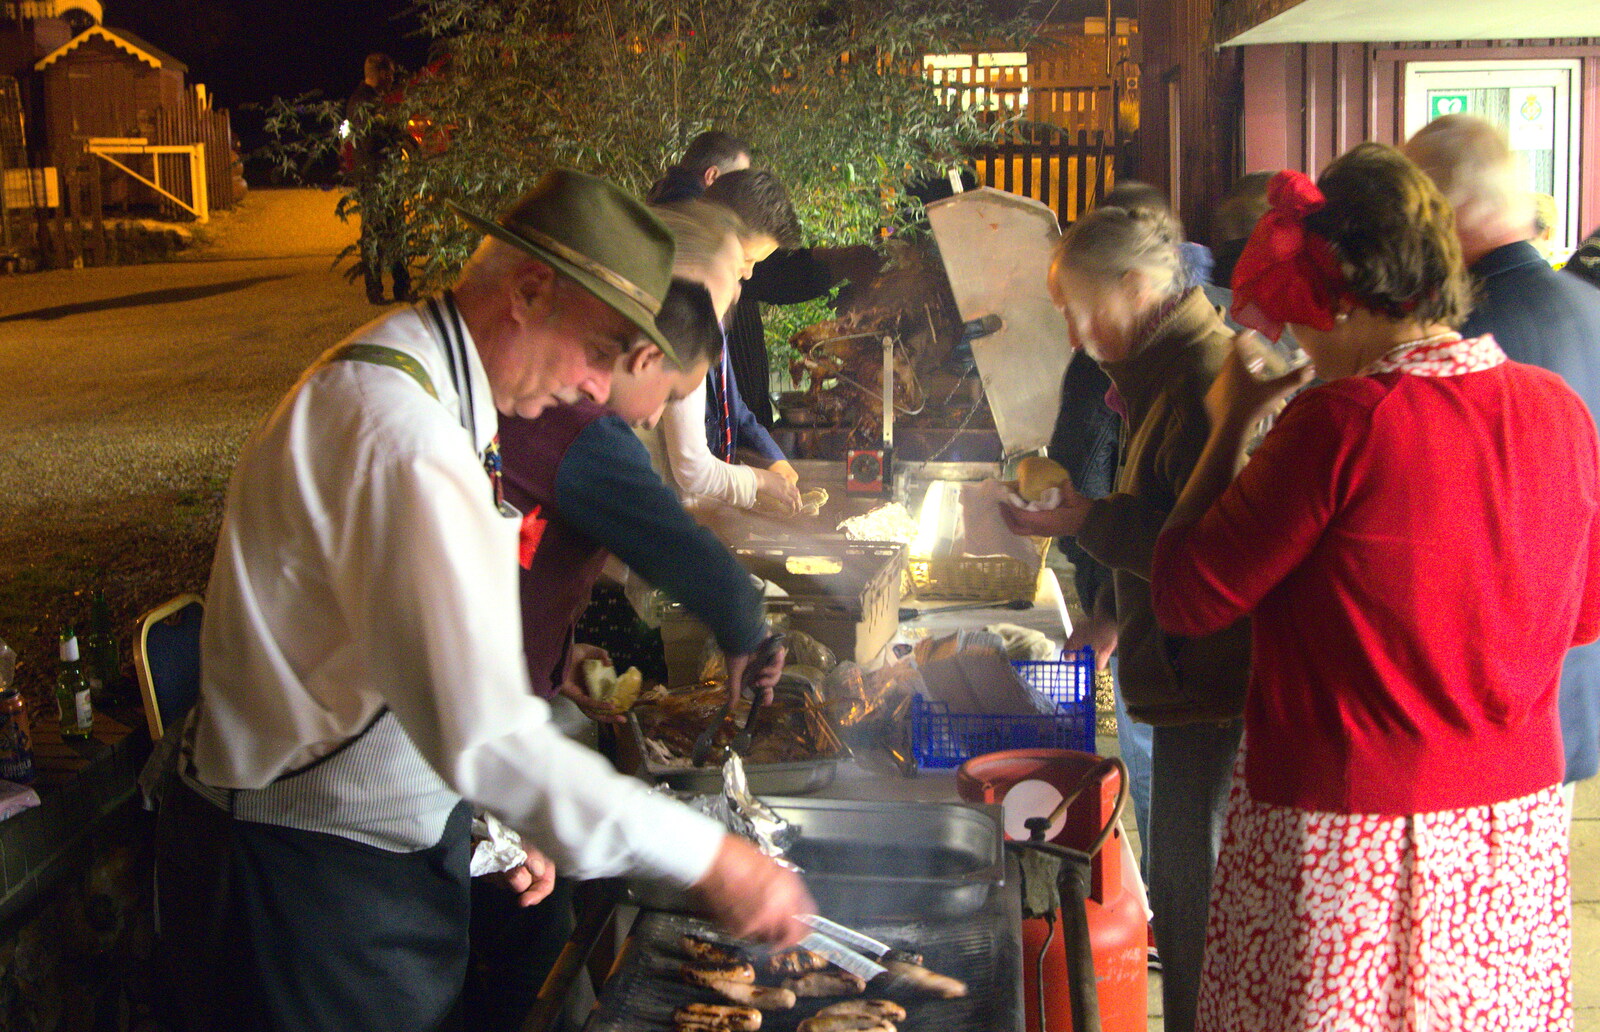 There's a barbeque occuring outside from A 1940s Dance, Bressingham Steam Museum, Bressingham, Norfolk - 19th September 2015